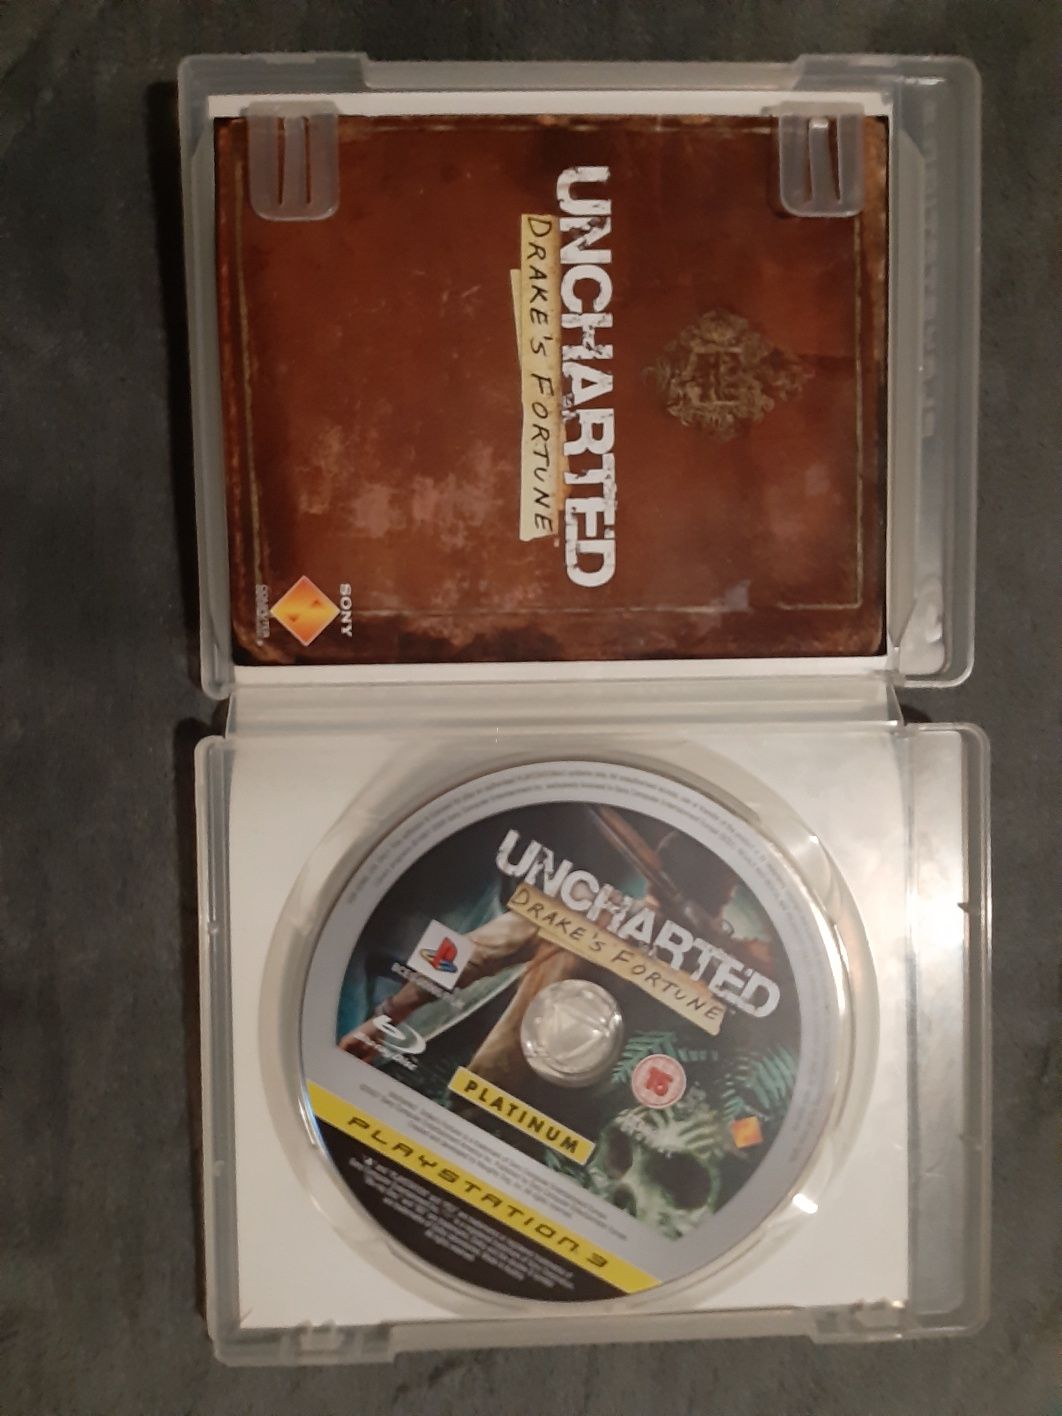 Uncharted drake's fortune ps3